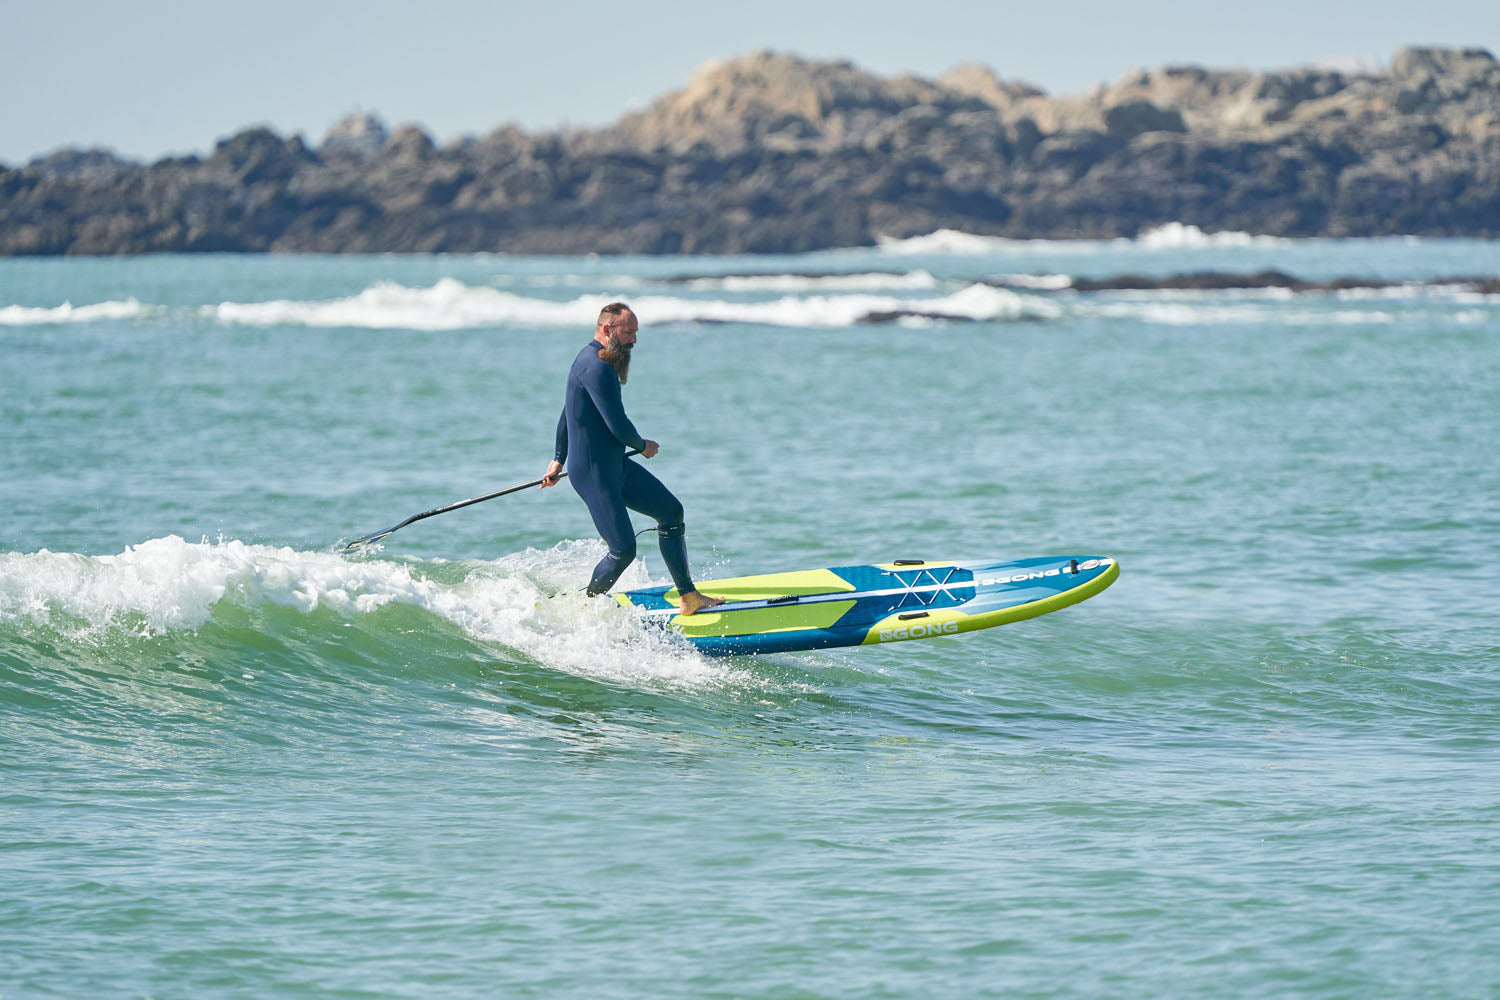 NEWS: 100 REASONS FOR DOING STAND-UP PADDLEBOARDING!